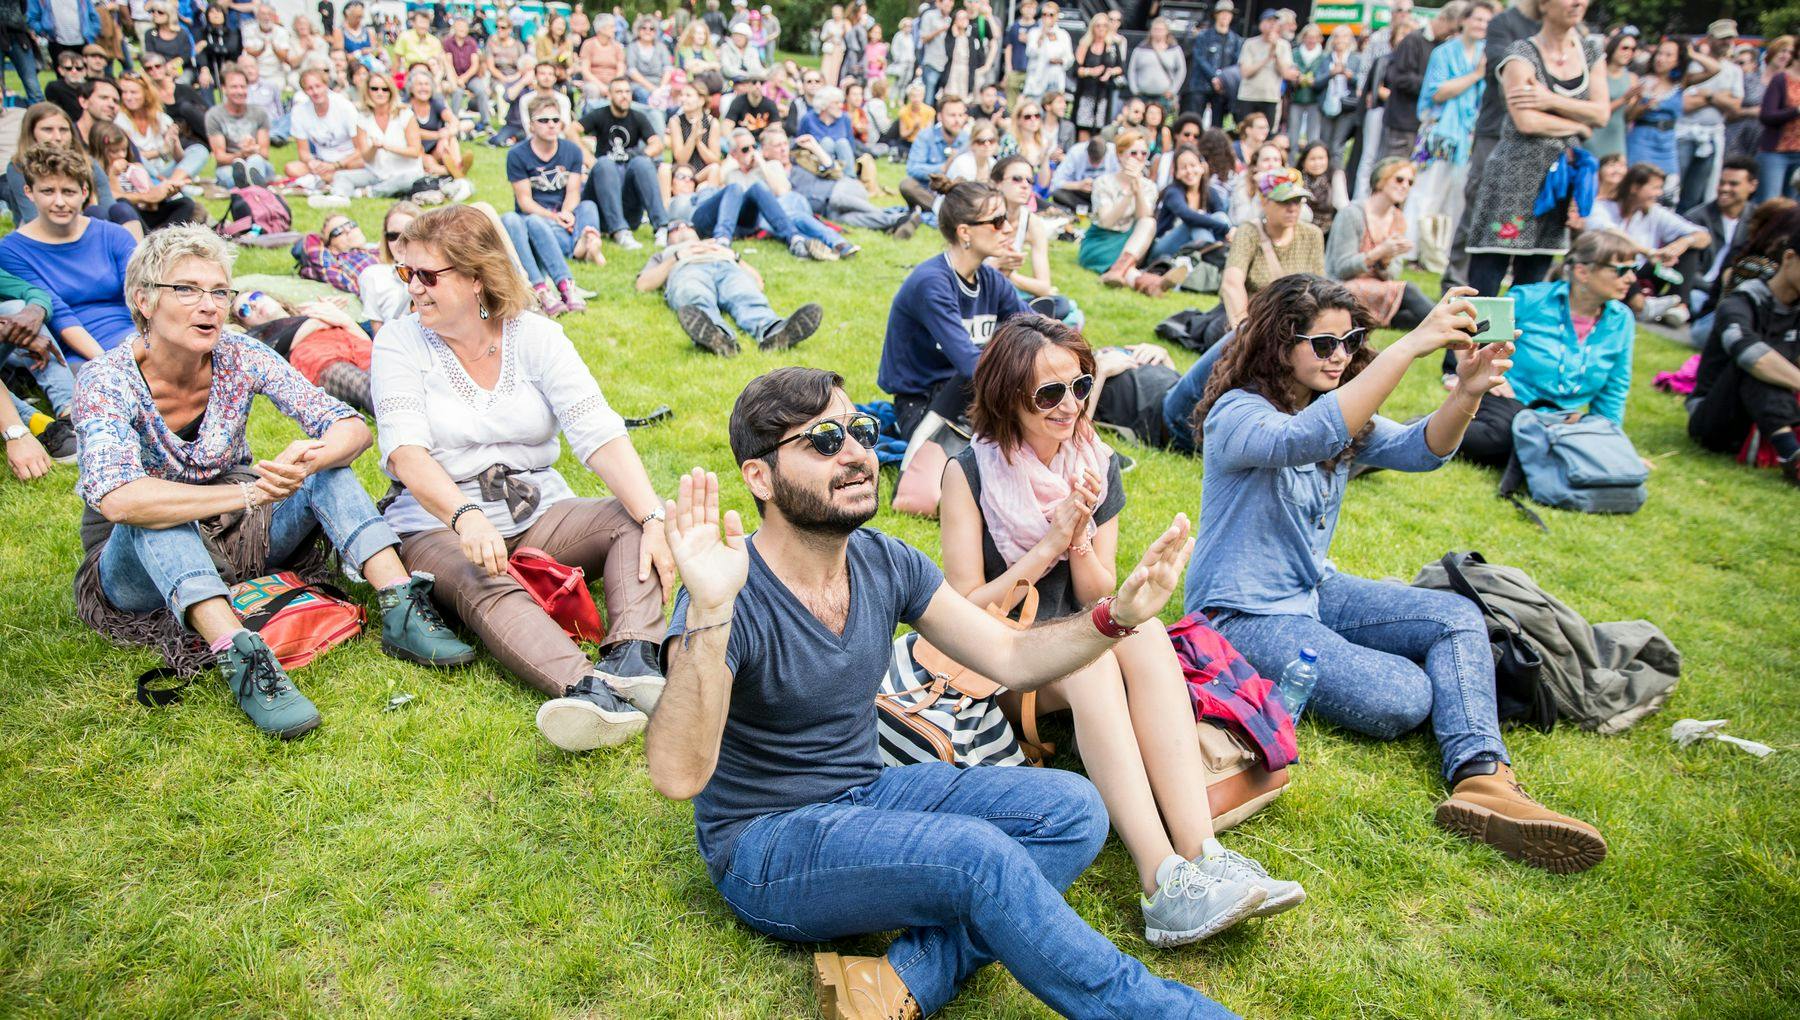 Amsterdam, The Netherlands - July, 3 2016: visitors sitting on the grass and cheering during Roots Open Air festival